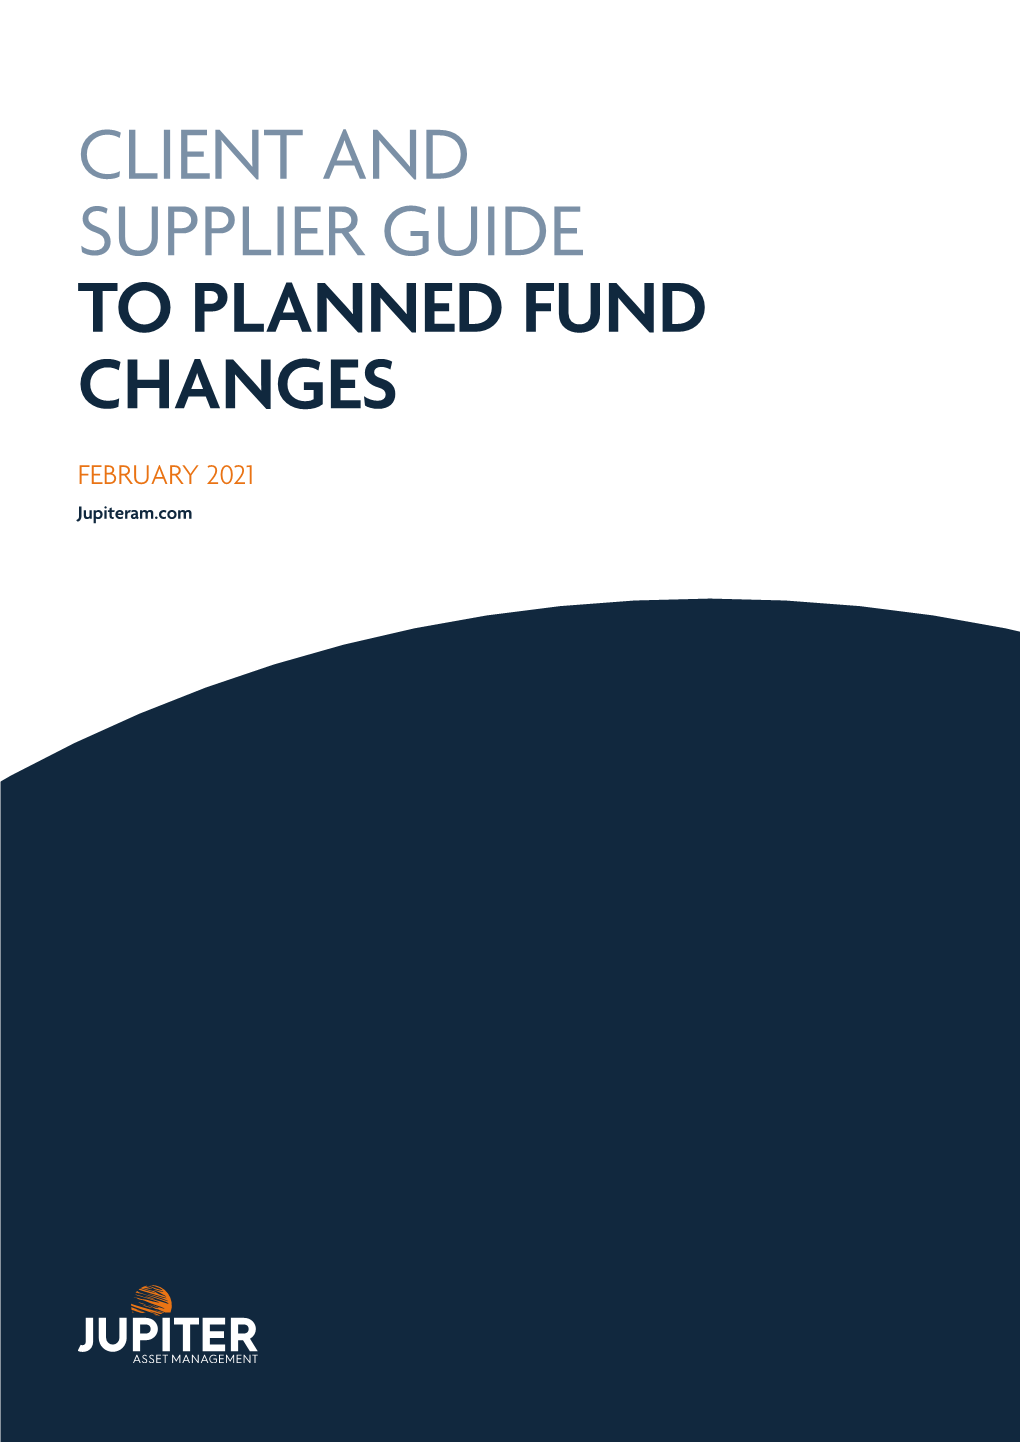 Client and Supplier Guide to Planned Fund Changes